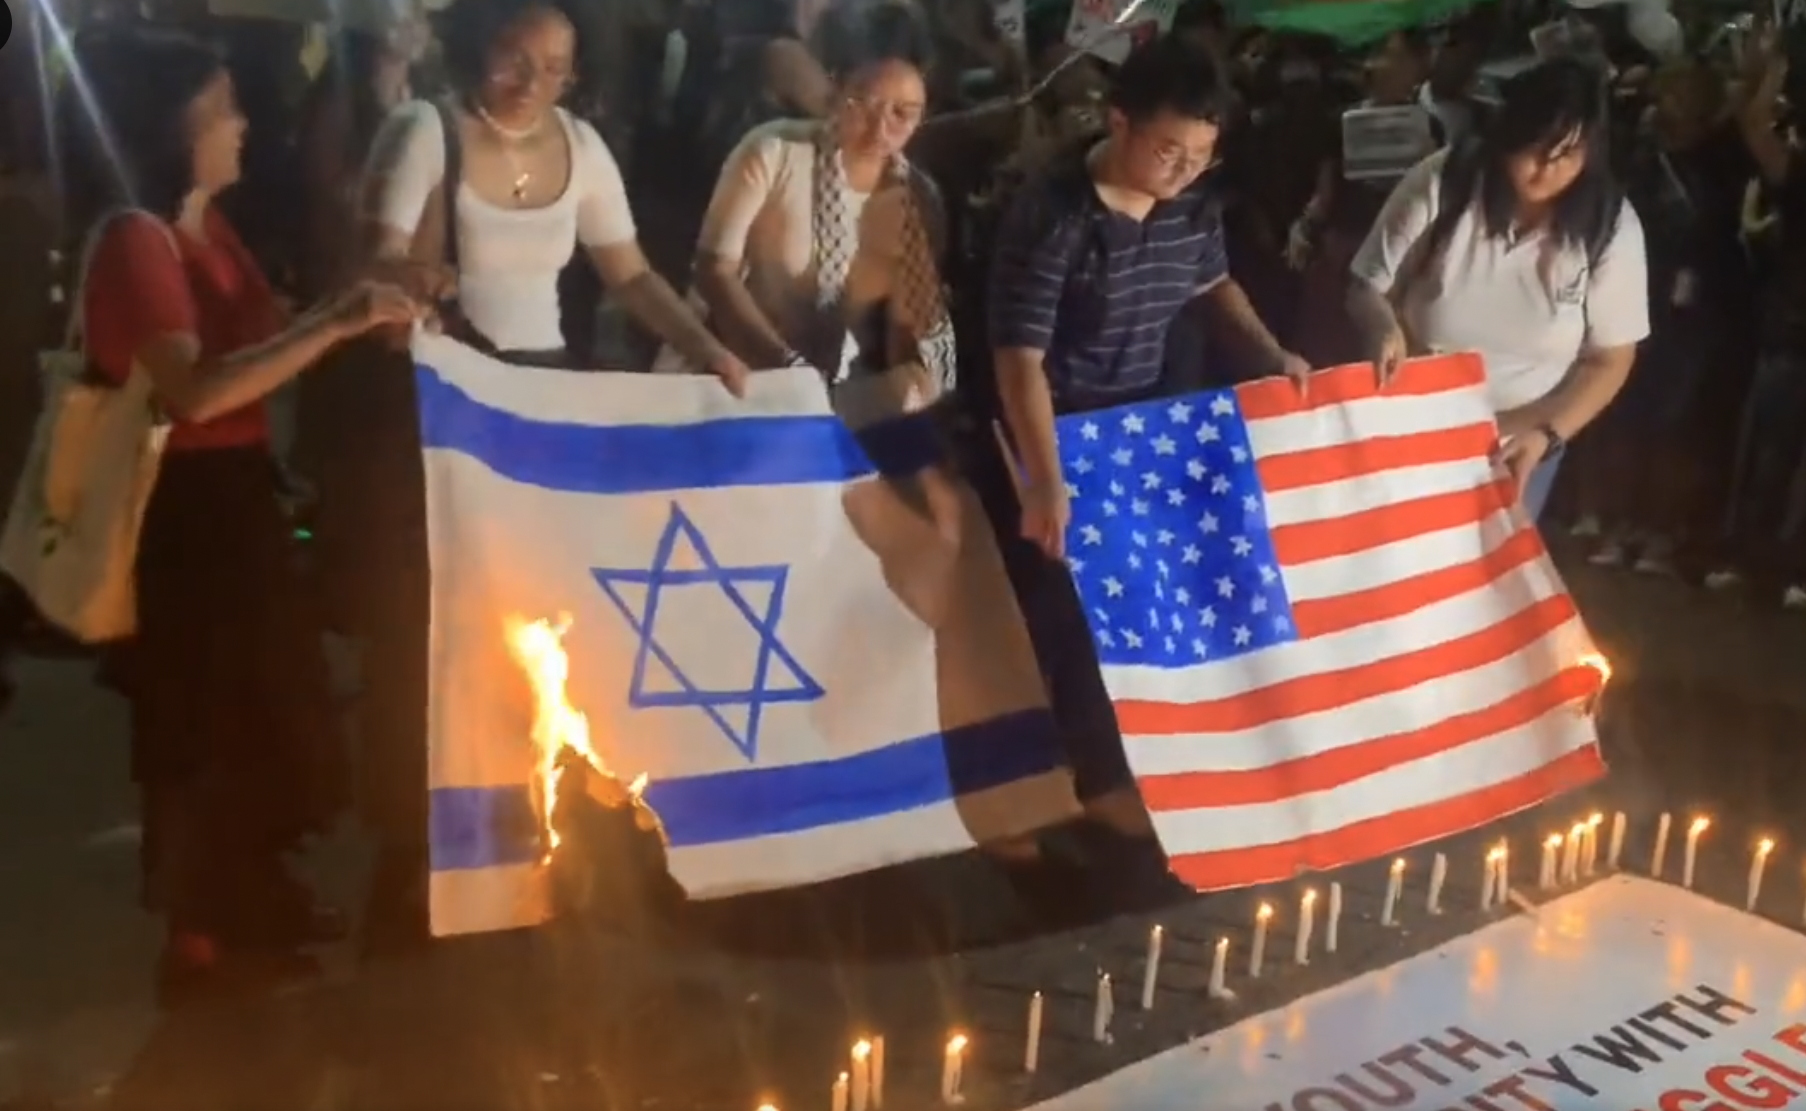 Israel ambassador to the Philippines Ilan Fluss on Friday said he was “shocked” and “disturbed” after pro-Palestine demonstrators in the country burned his nation’s flag during protests.